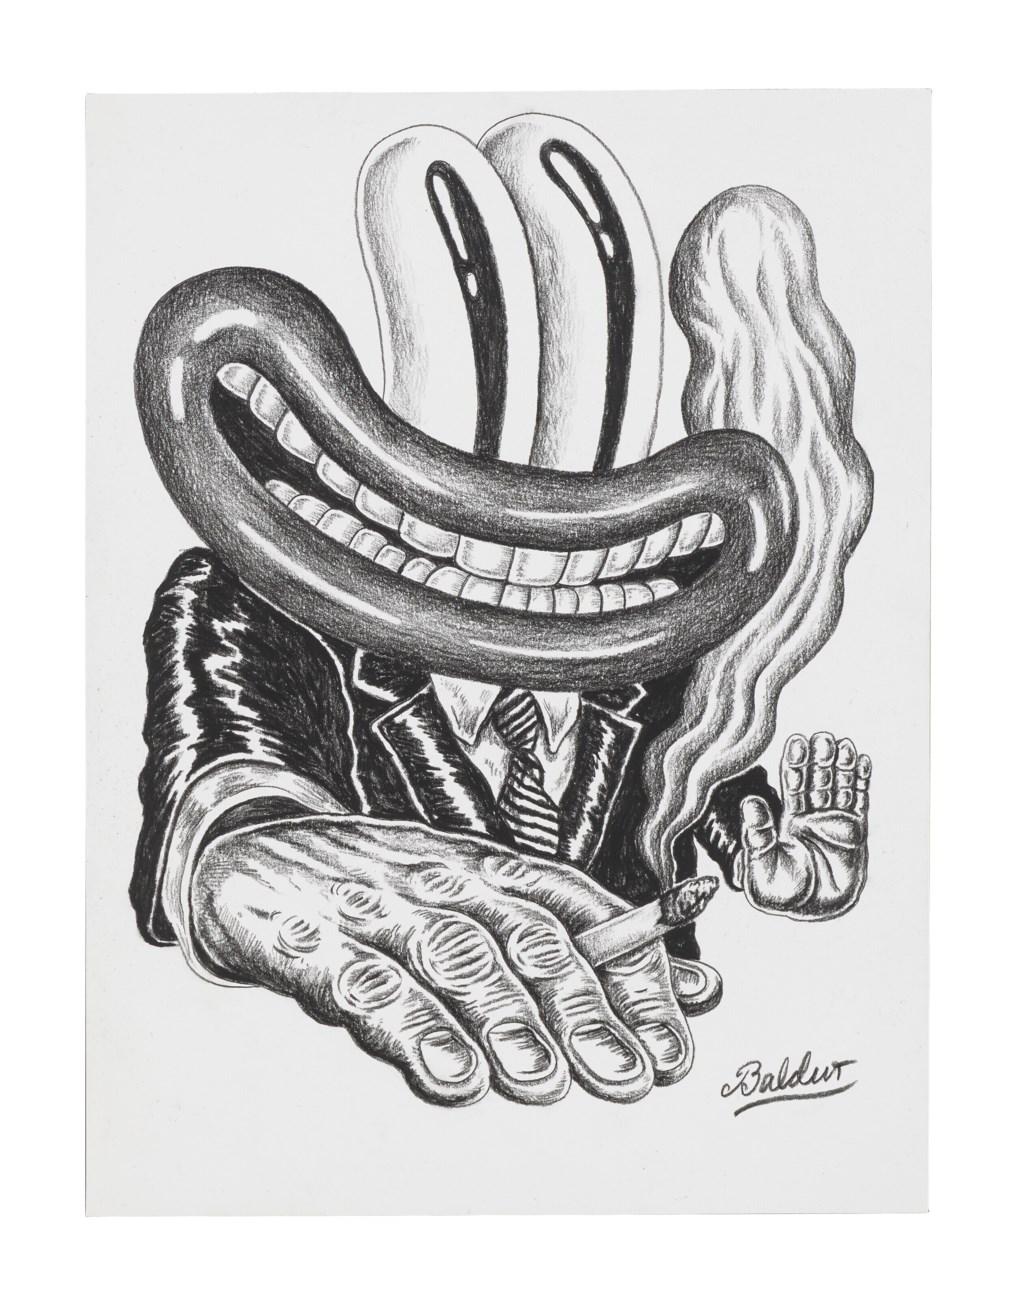 Baldur Helgason drawing 2018: Baldur Helgason Jorgen the Dog Day:

A robust, lively Helgason hand-drawing defined by the artist’s signature style.

Medium: wax crayon on paper. Unique. Executed in 2018.

11.75 x 9 inches (28.7 x 22.9 cm).
Dimensions